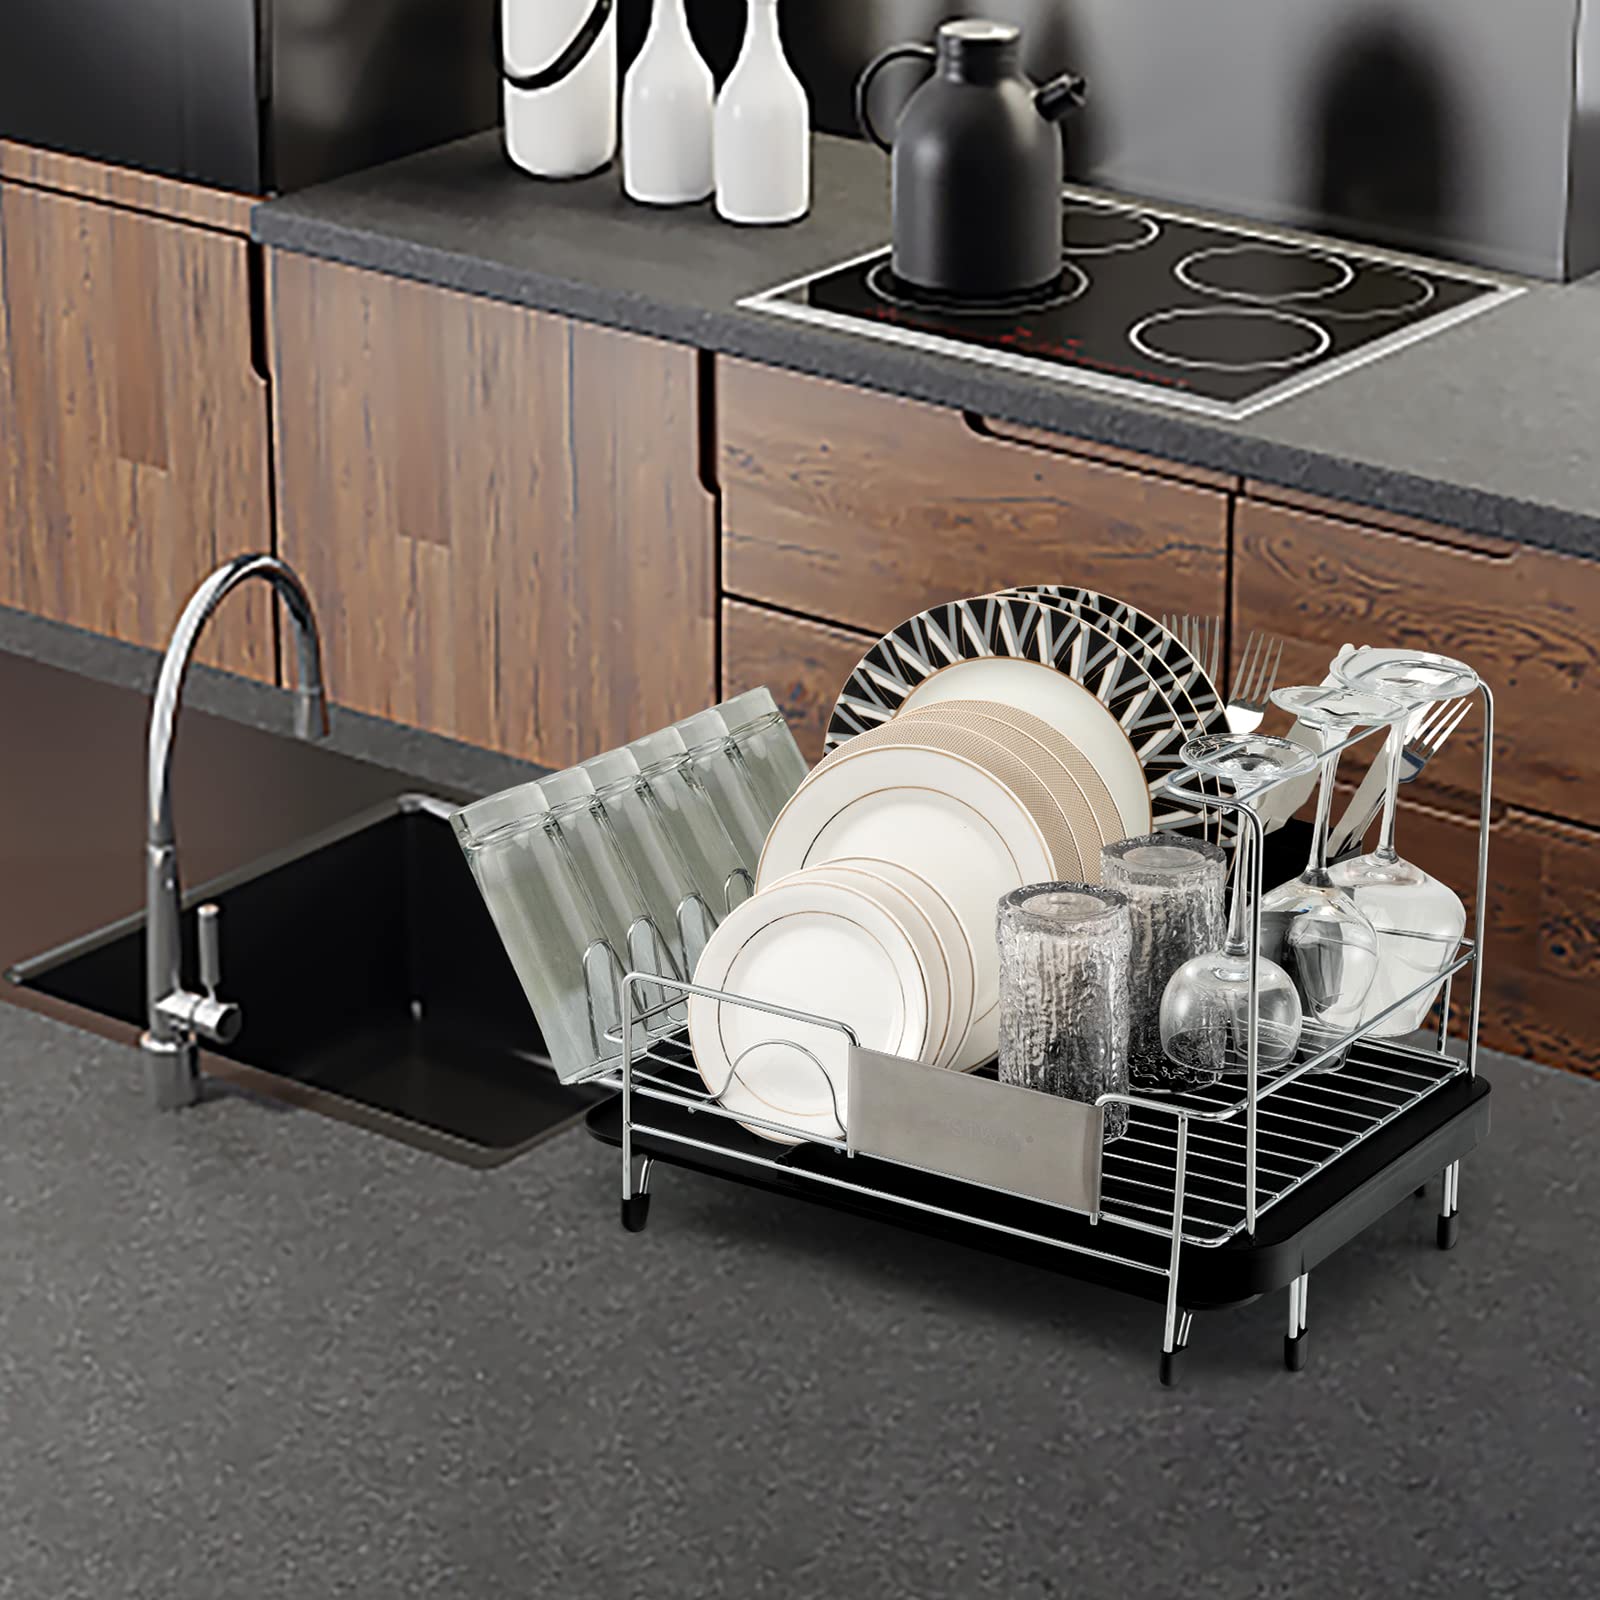 Giantex Stainless Steel Dish Rack, Expandable Dish Drainer Rack with Cutlery Cup Glass Holder